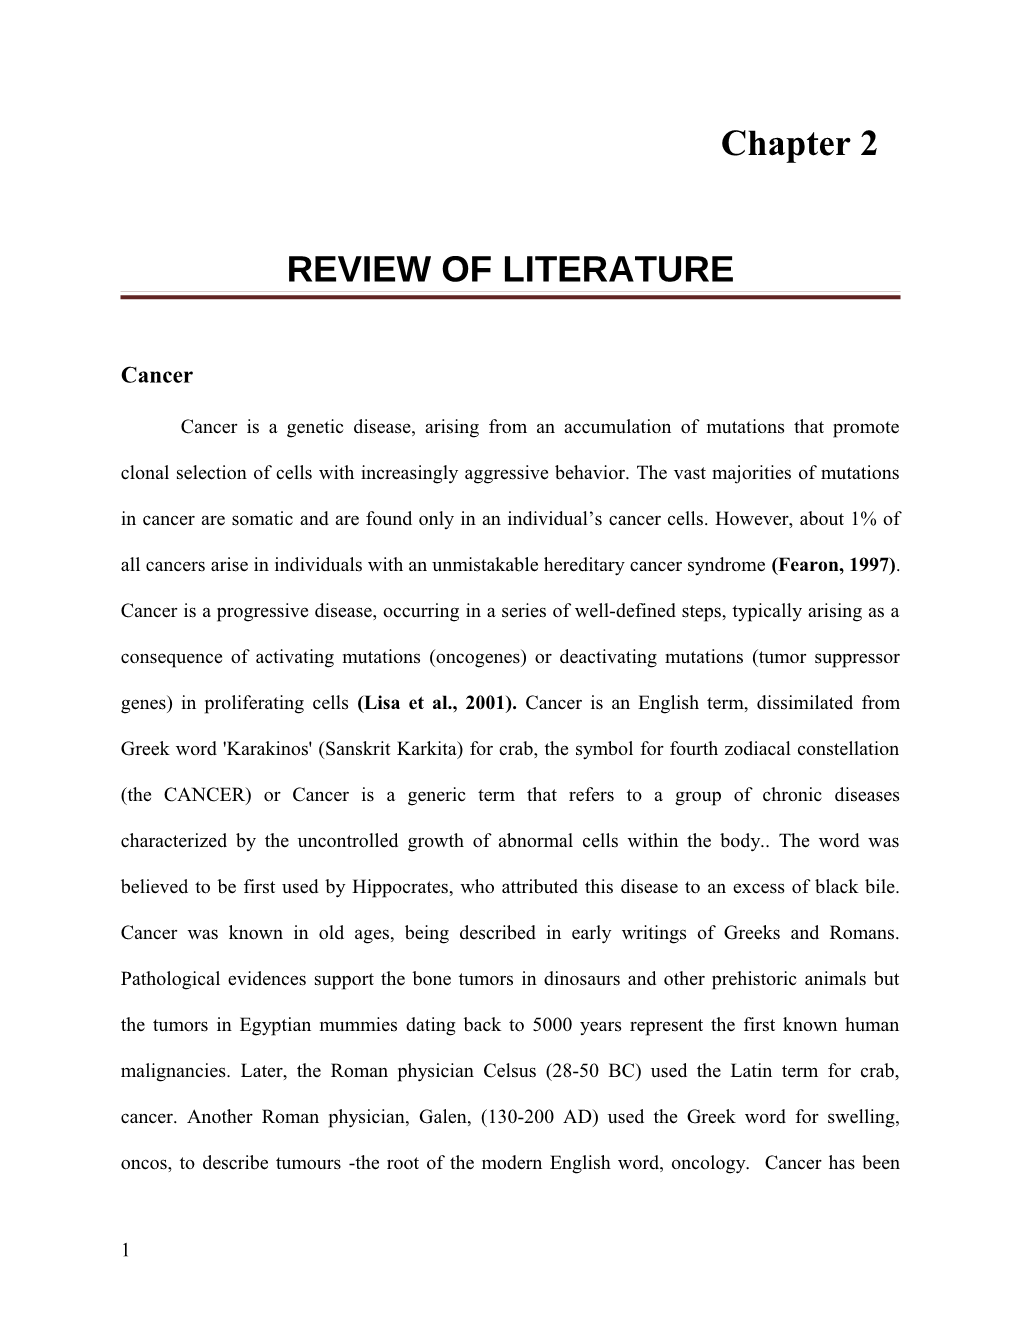 Review of Literature s1